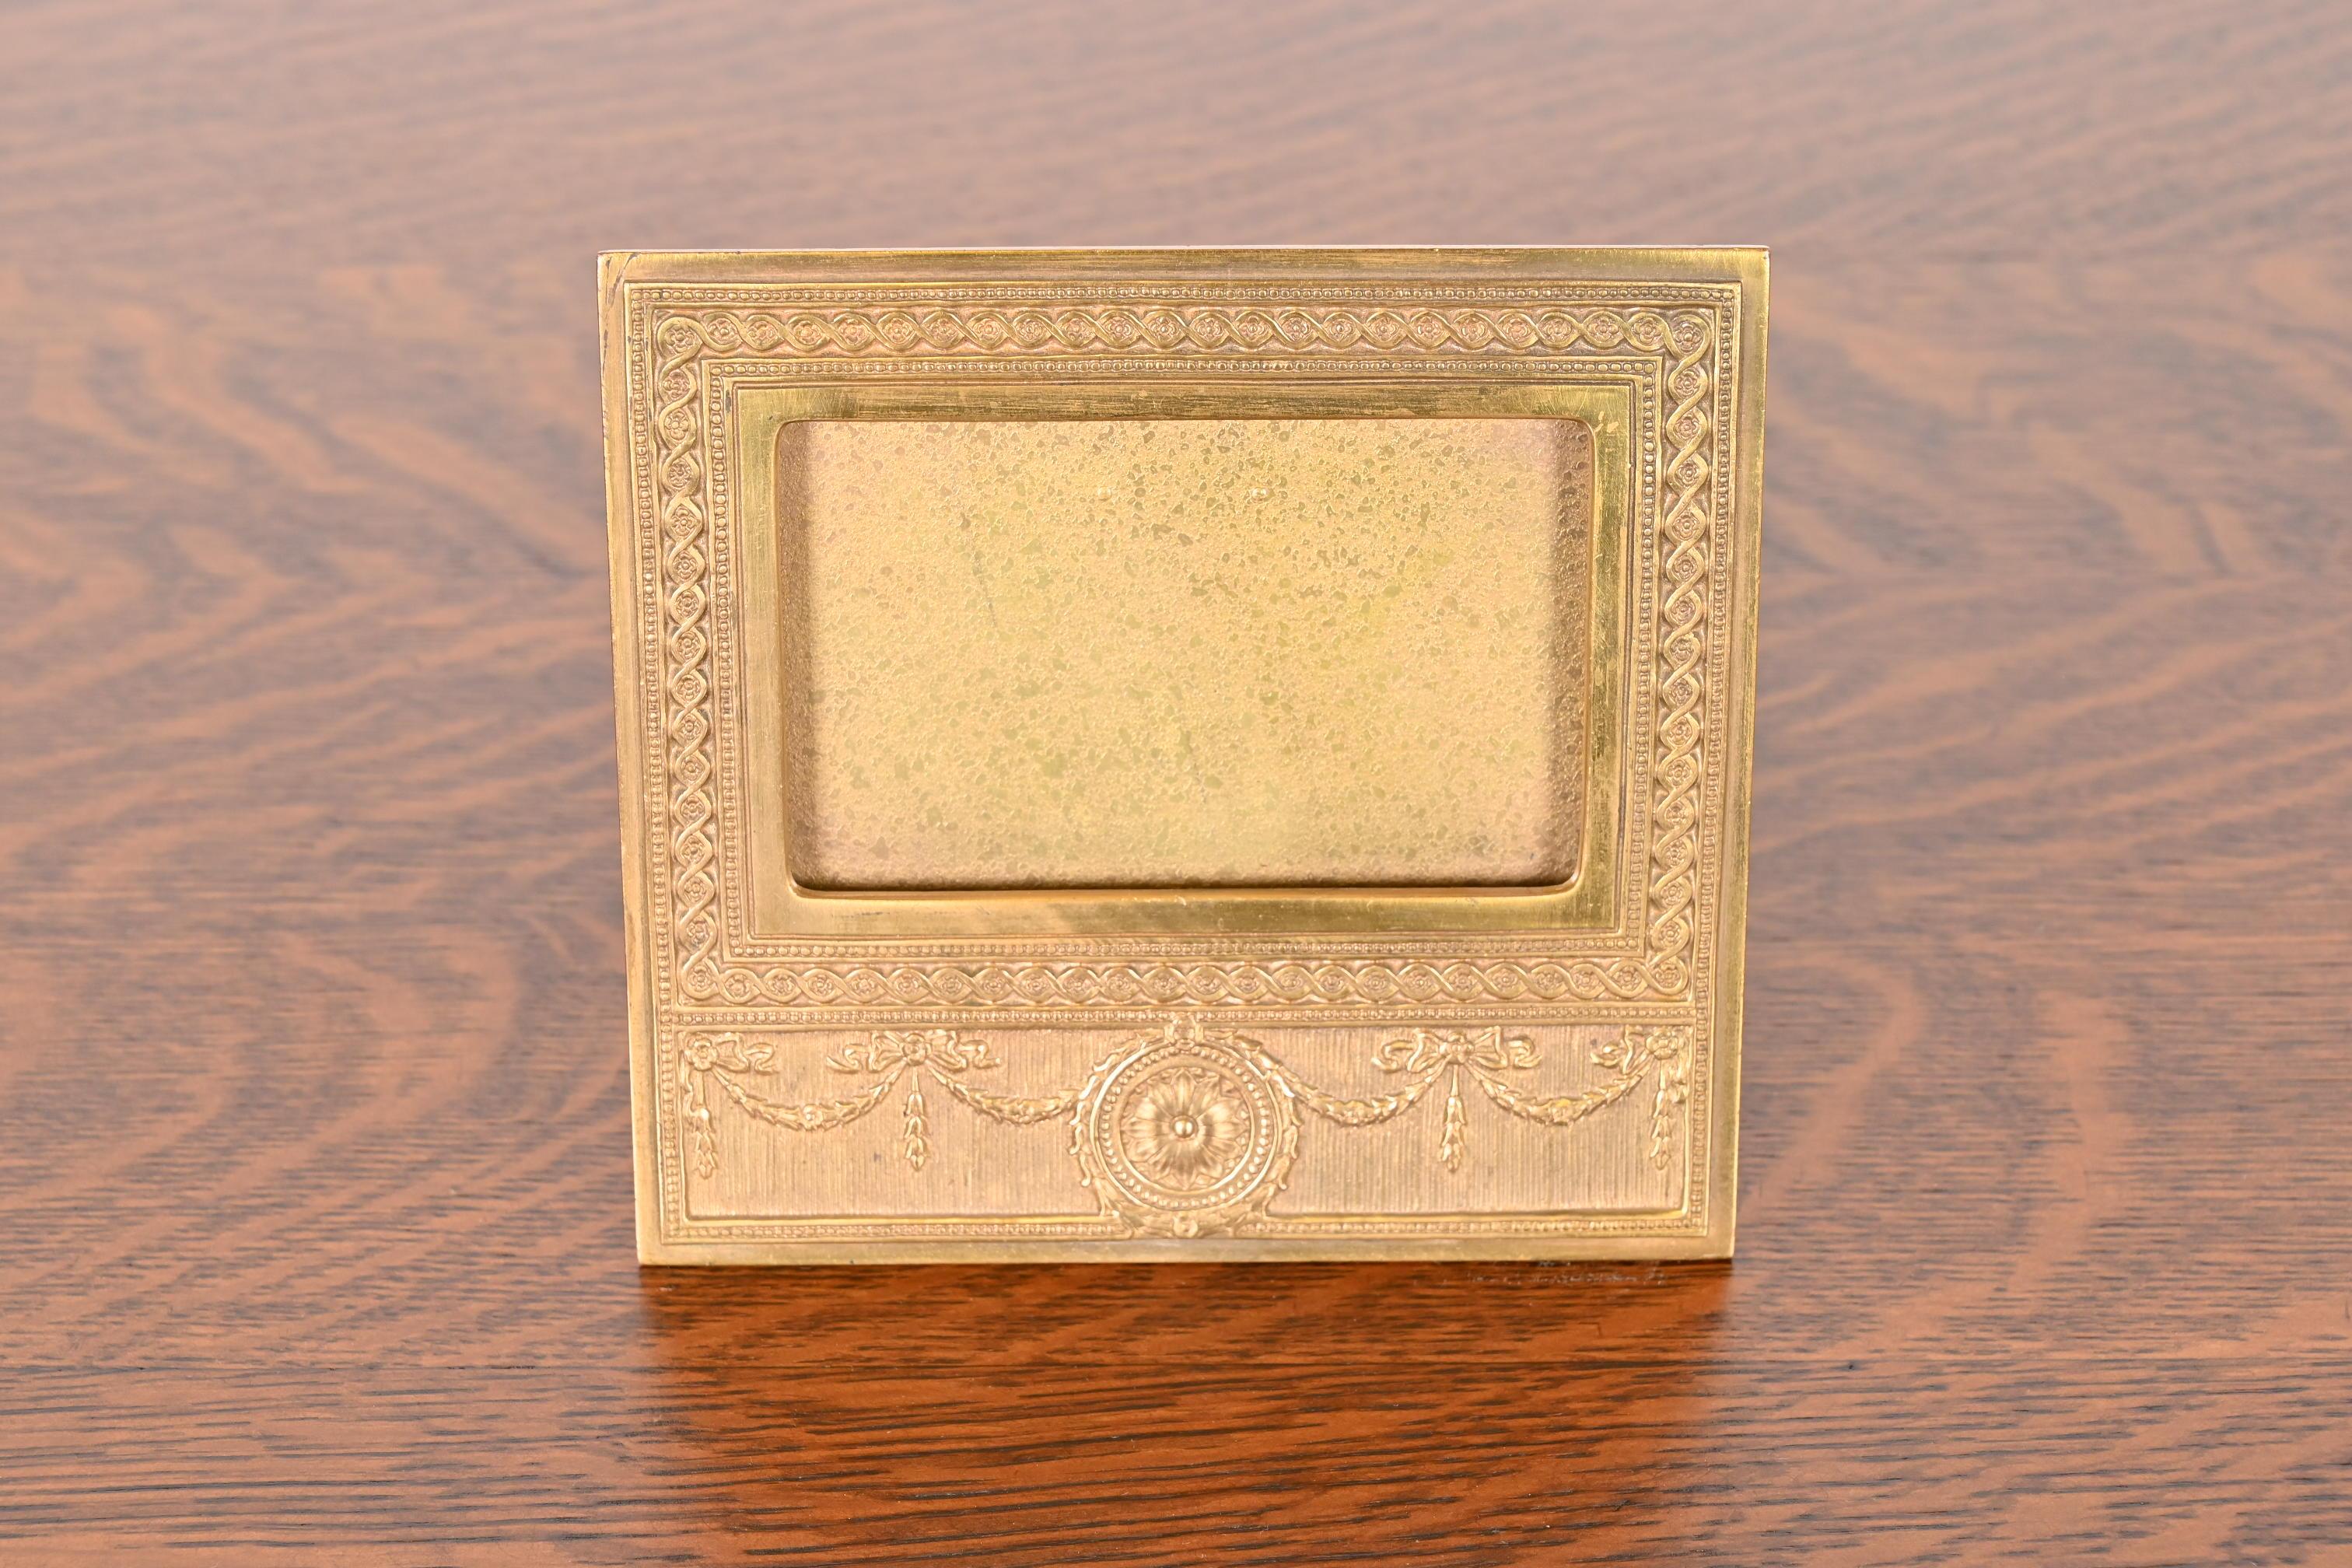 A gorgeous antique gilt bronze Neoclassical or Adam style desk calendar frame or picture frame

By Tiffany Studios (signed to the back)

New York, USA, Early 20th Century

Measures: 6.38